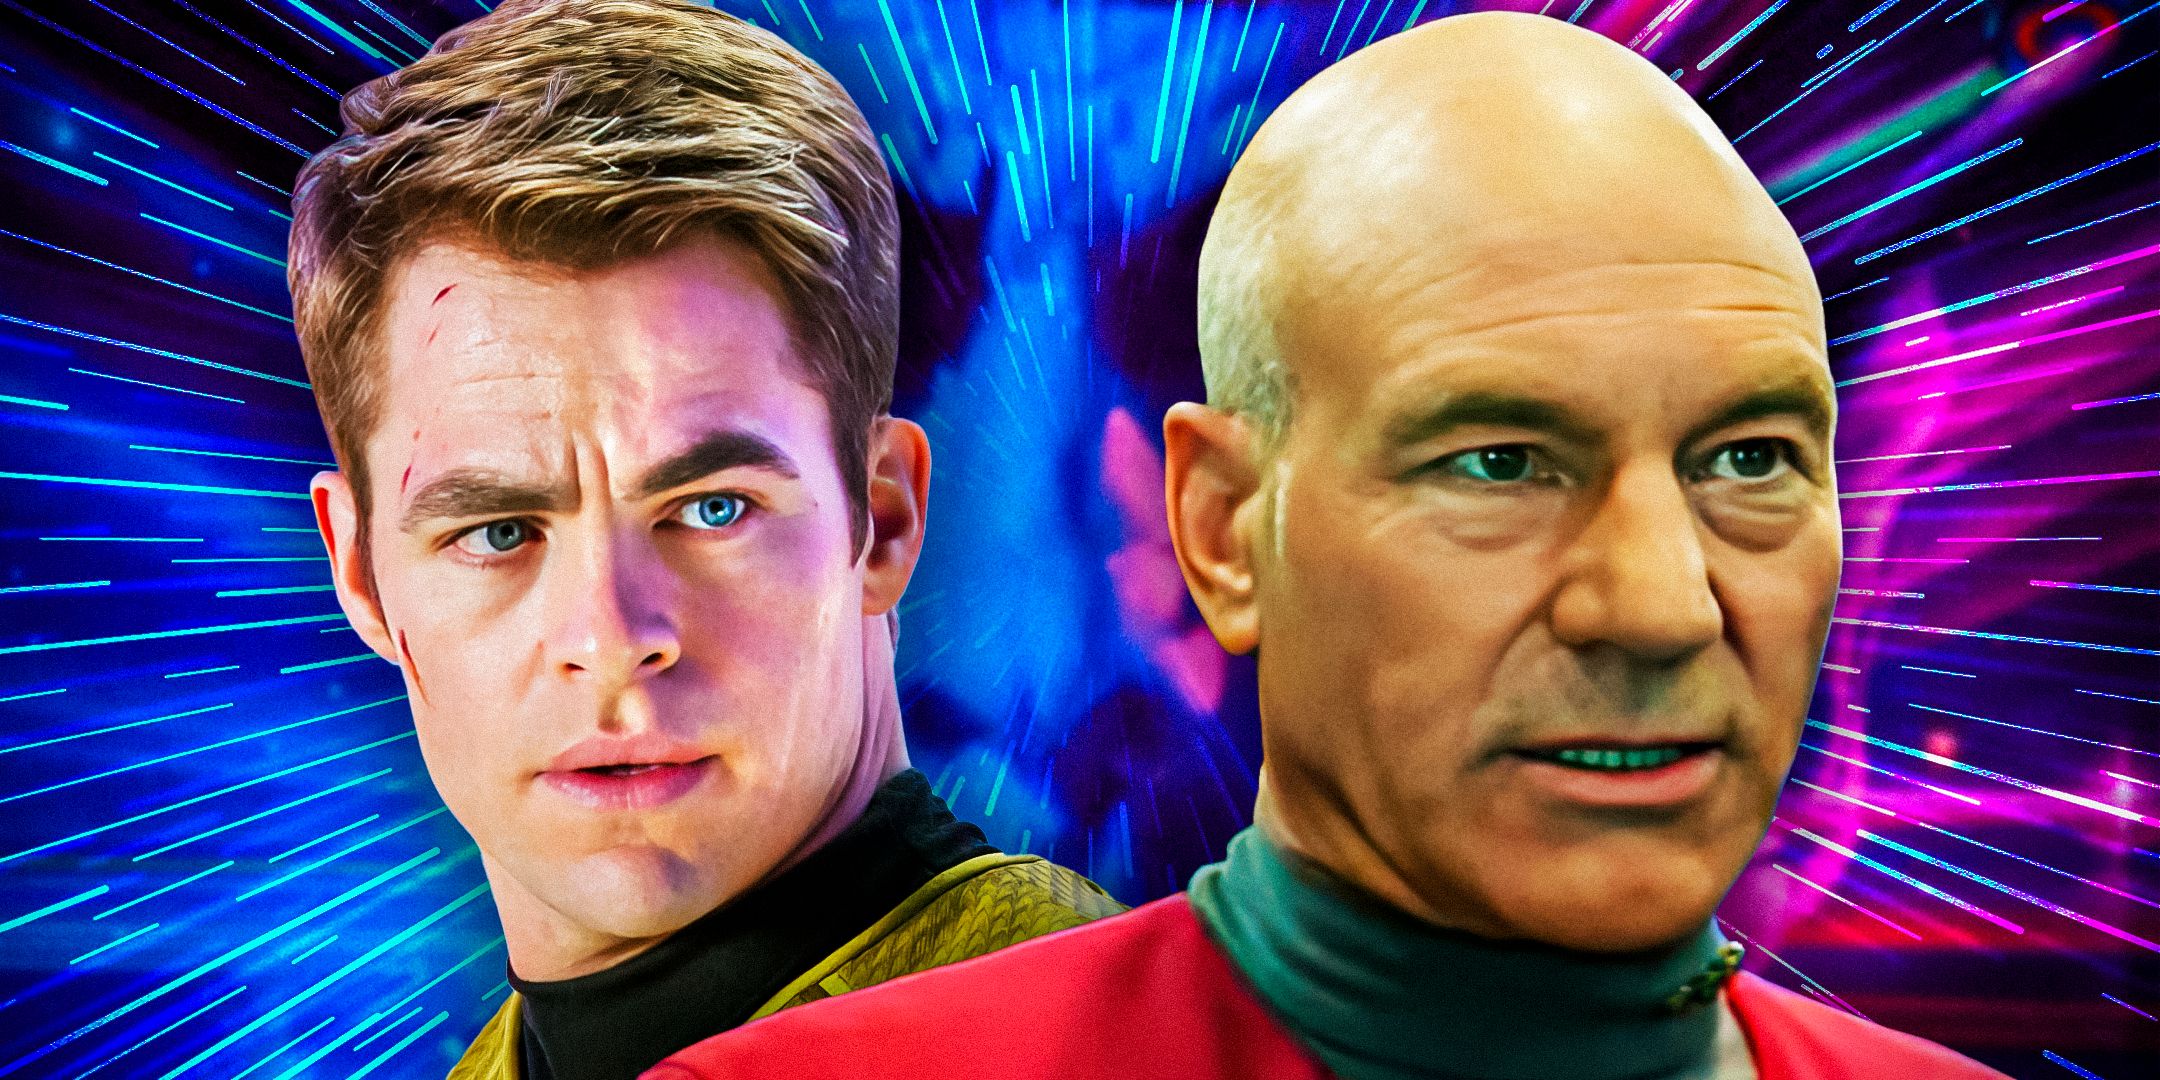 Chris-Pine-as-Kirk-from-Star-Trek-Into-Darkness-and-(Patrick-Stewart-as-Picard)-from-Star-Trek-Generations